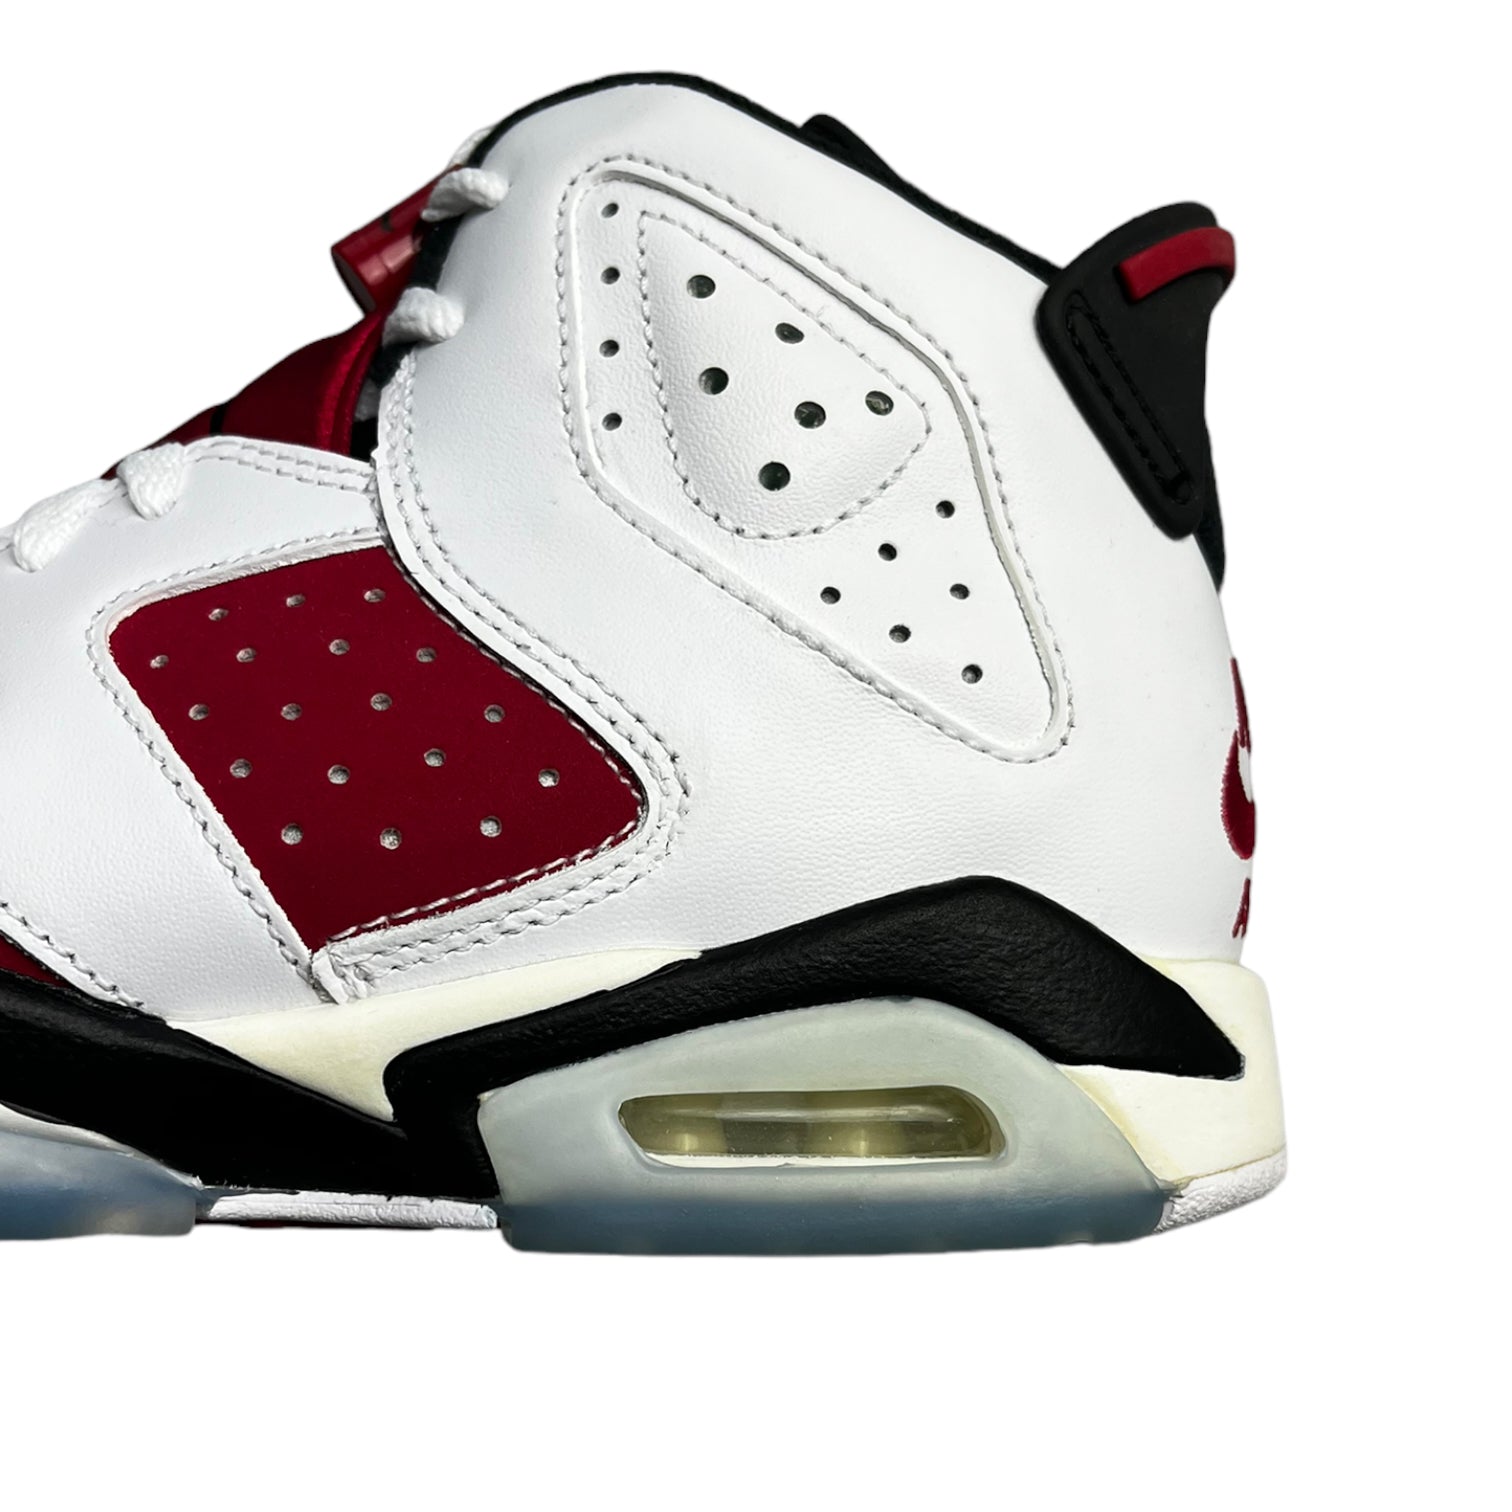 Jordan 6 Carmine - Red and White Sneakers (Steal)